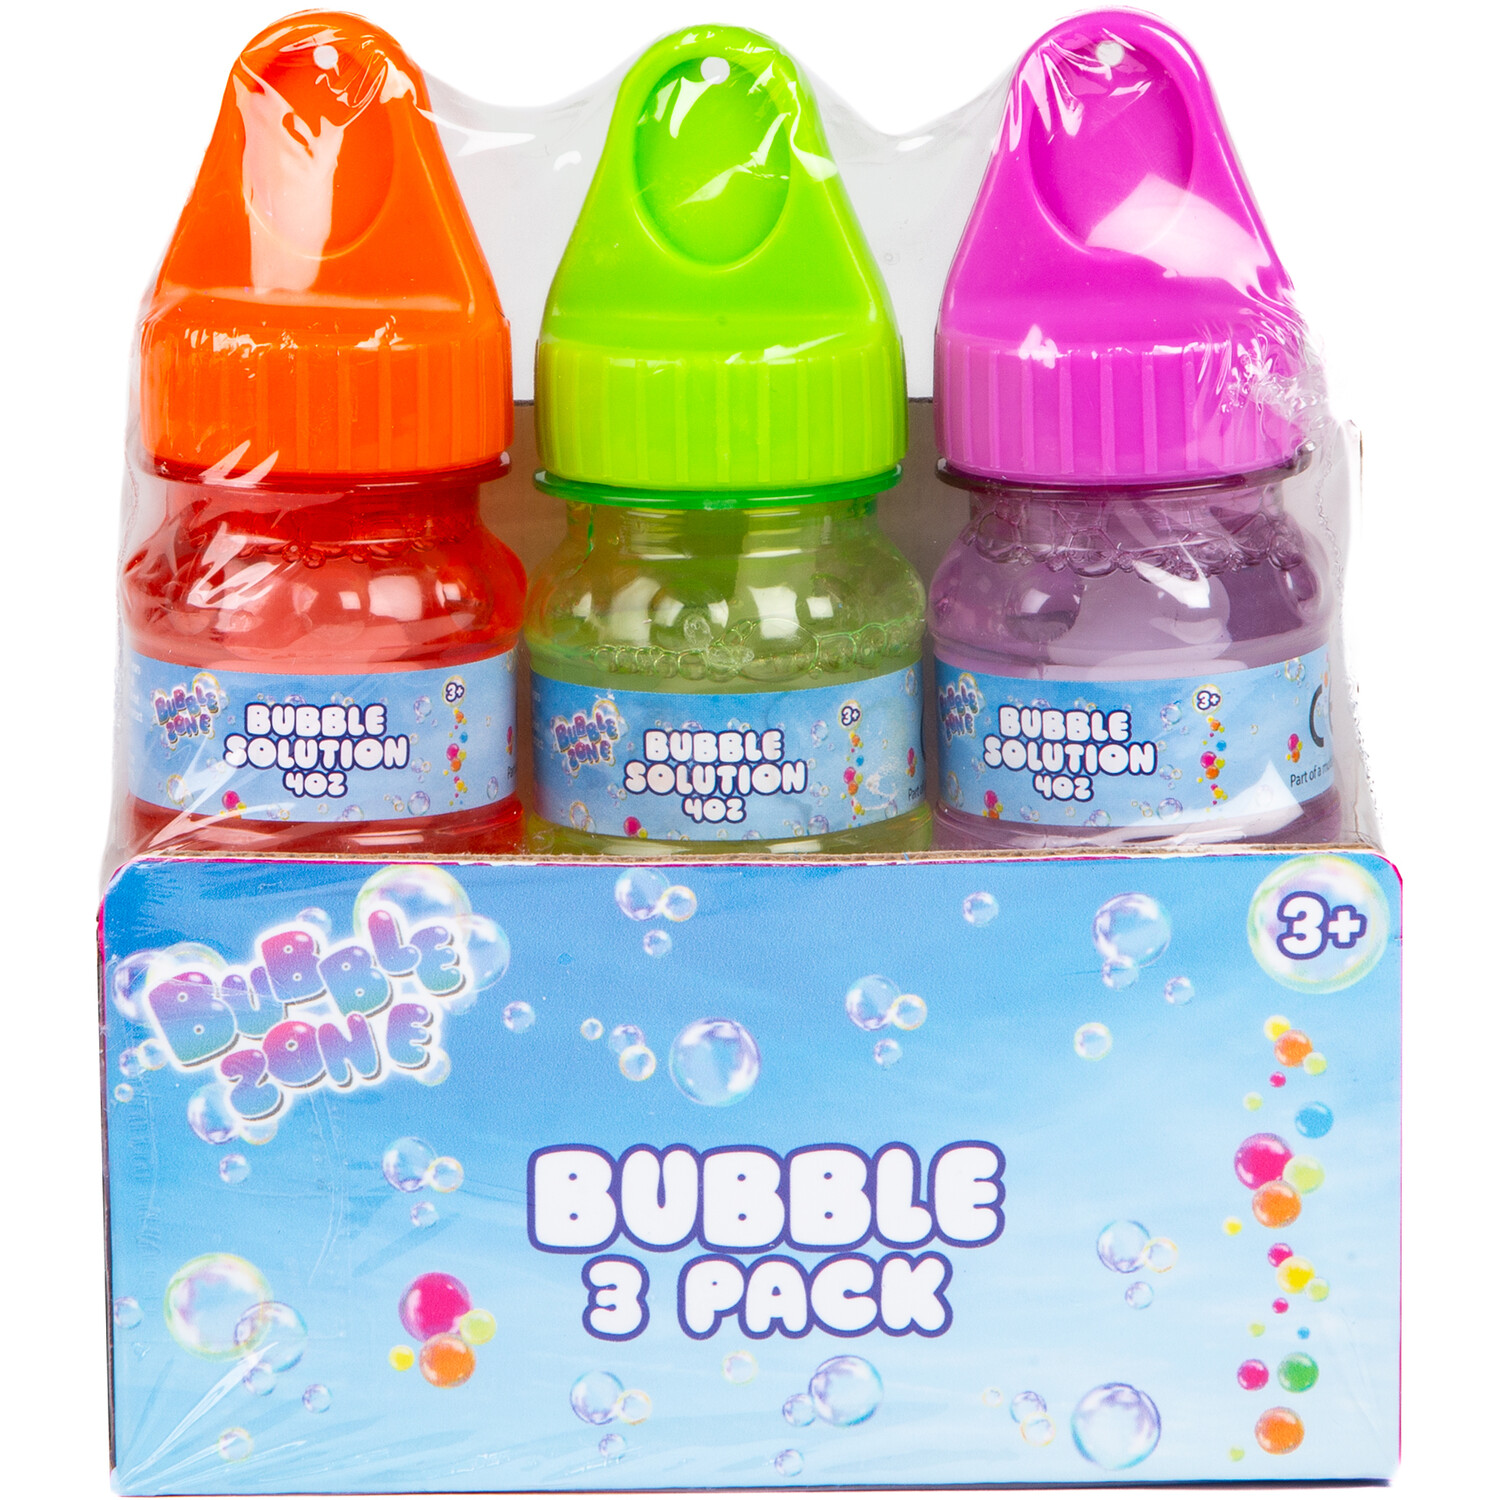 Pack of 3 Bubbles Image